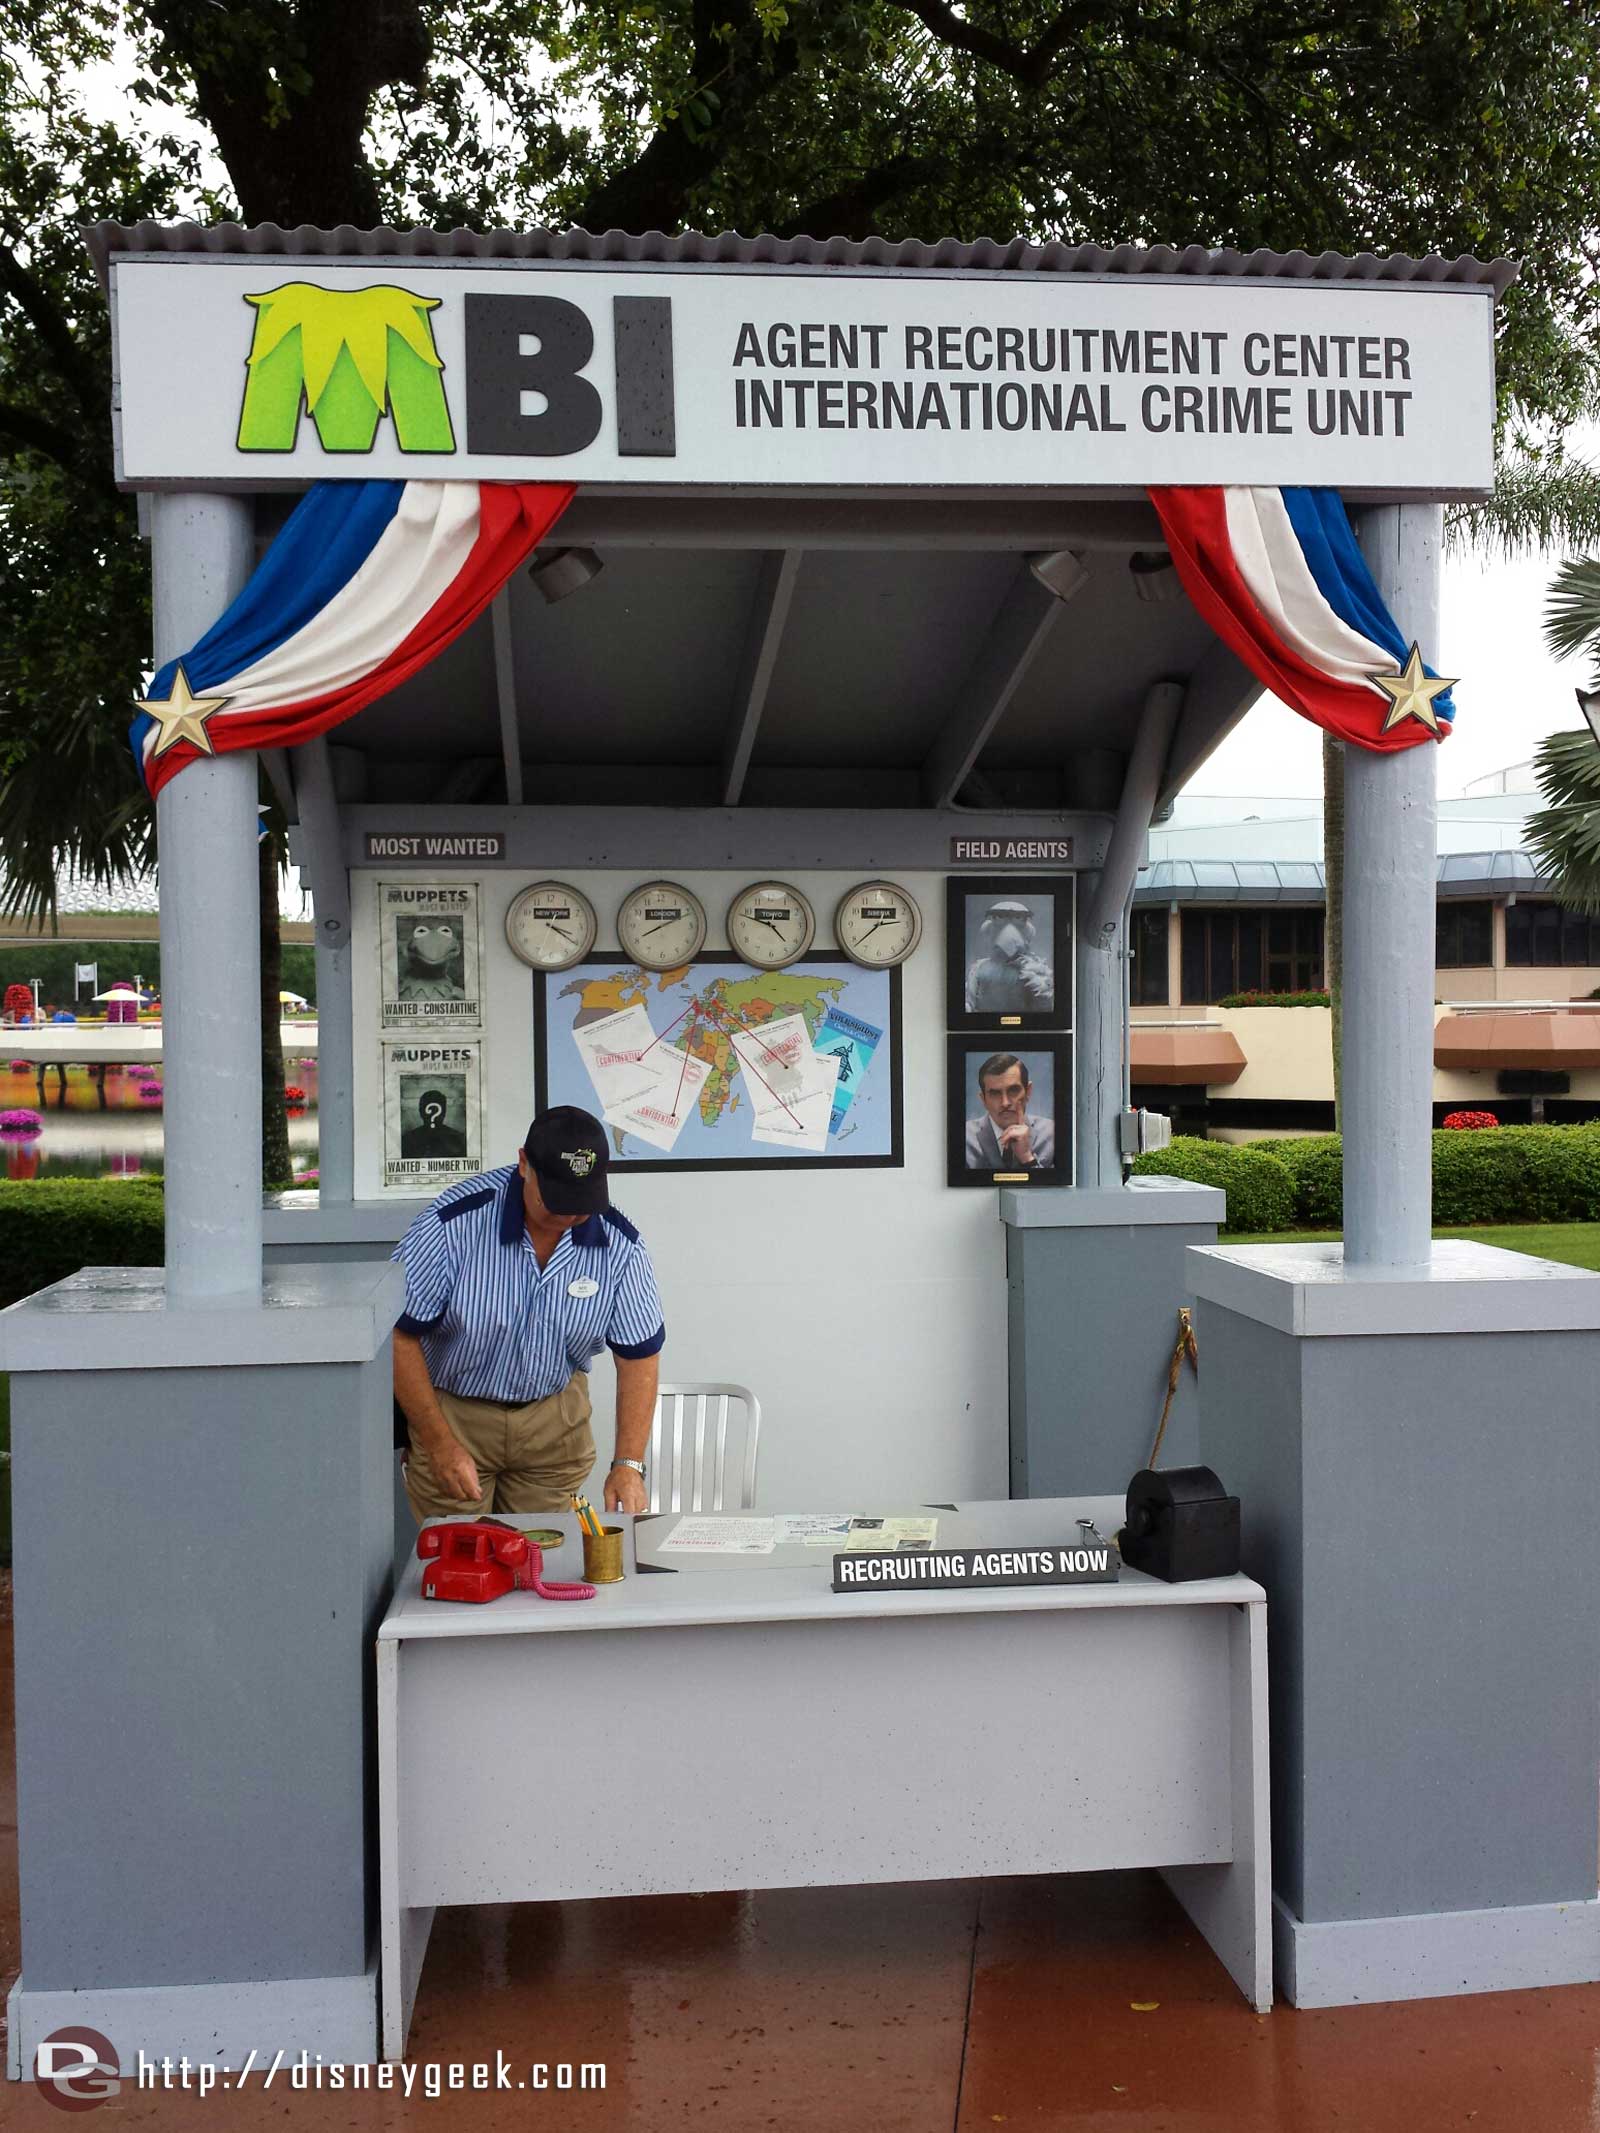 The kiosk for the MIB